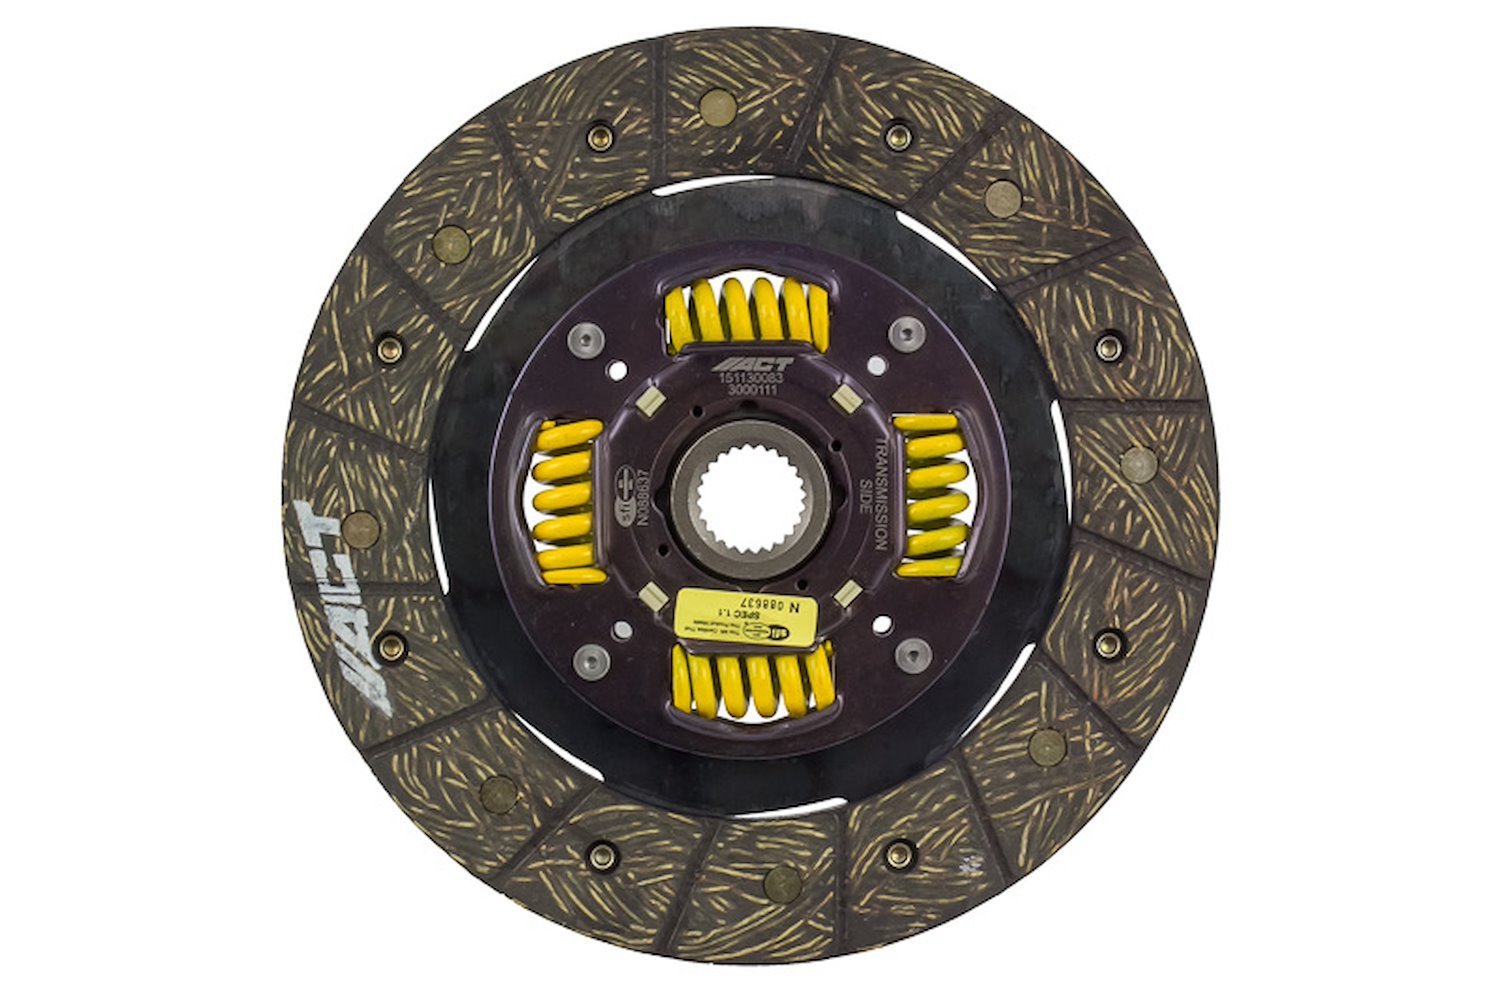 Performance Street Sprung Clutch Disc Transmission Clutch Friction Plate Fits Select Acura/Honda